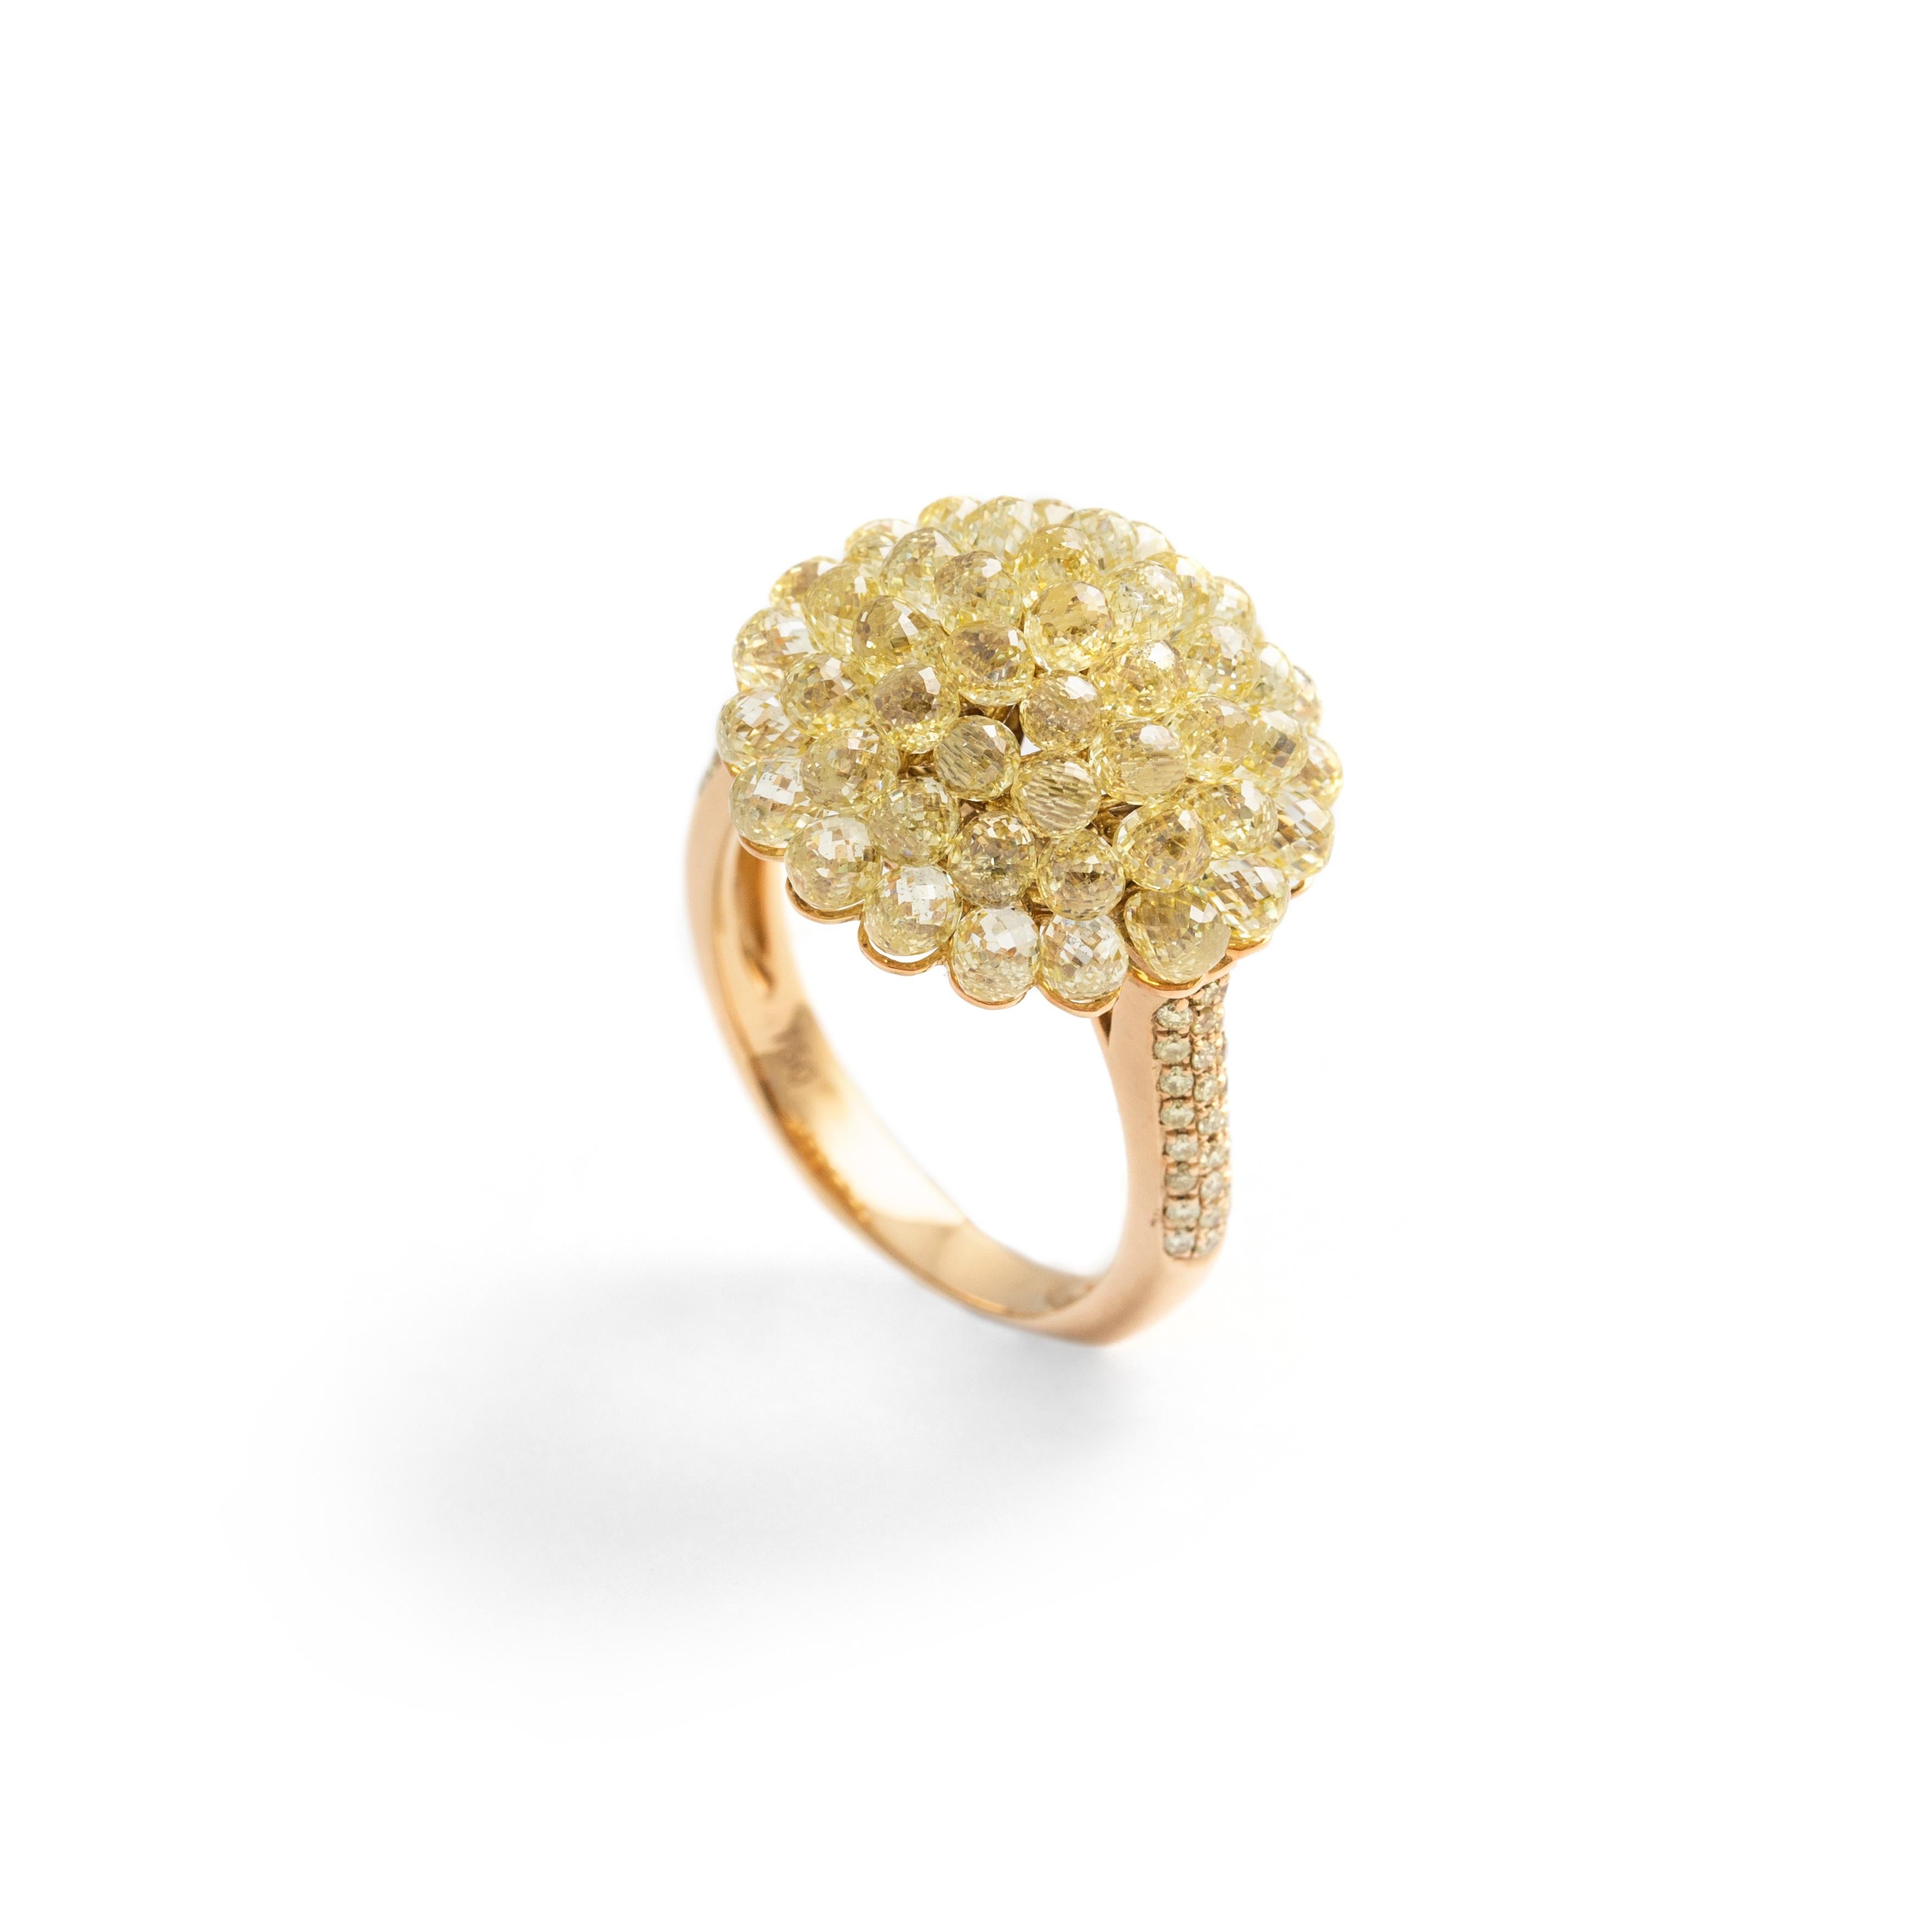 Ring in yellow gold 18K with briolette cut and round cut yellow color diamond 9.05 carat, estimated Si1 clarity.
Size: 7.25
Dimensions: approx. 1.70 x 1.70 centimeters
Total gross weight: 7.39 grams.